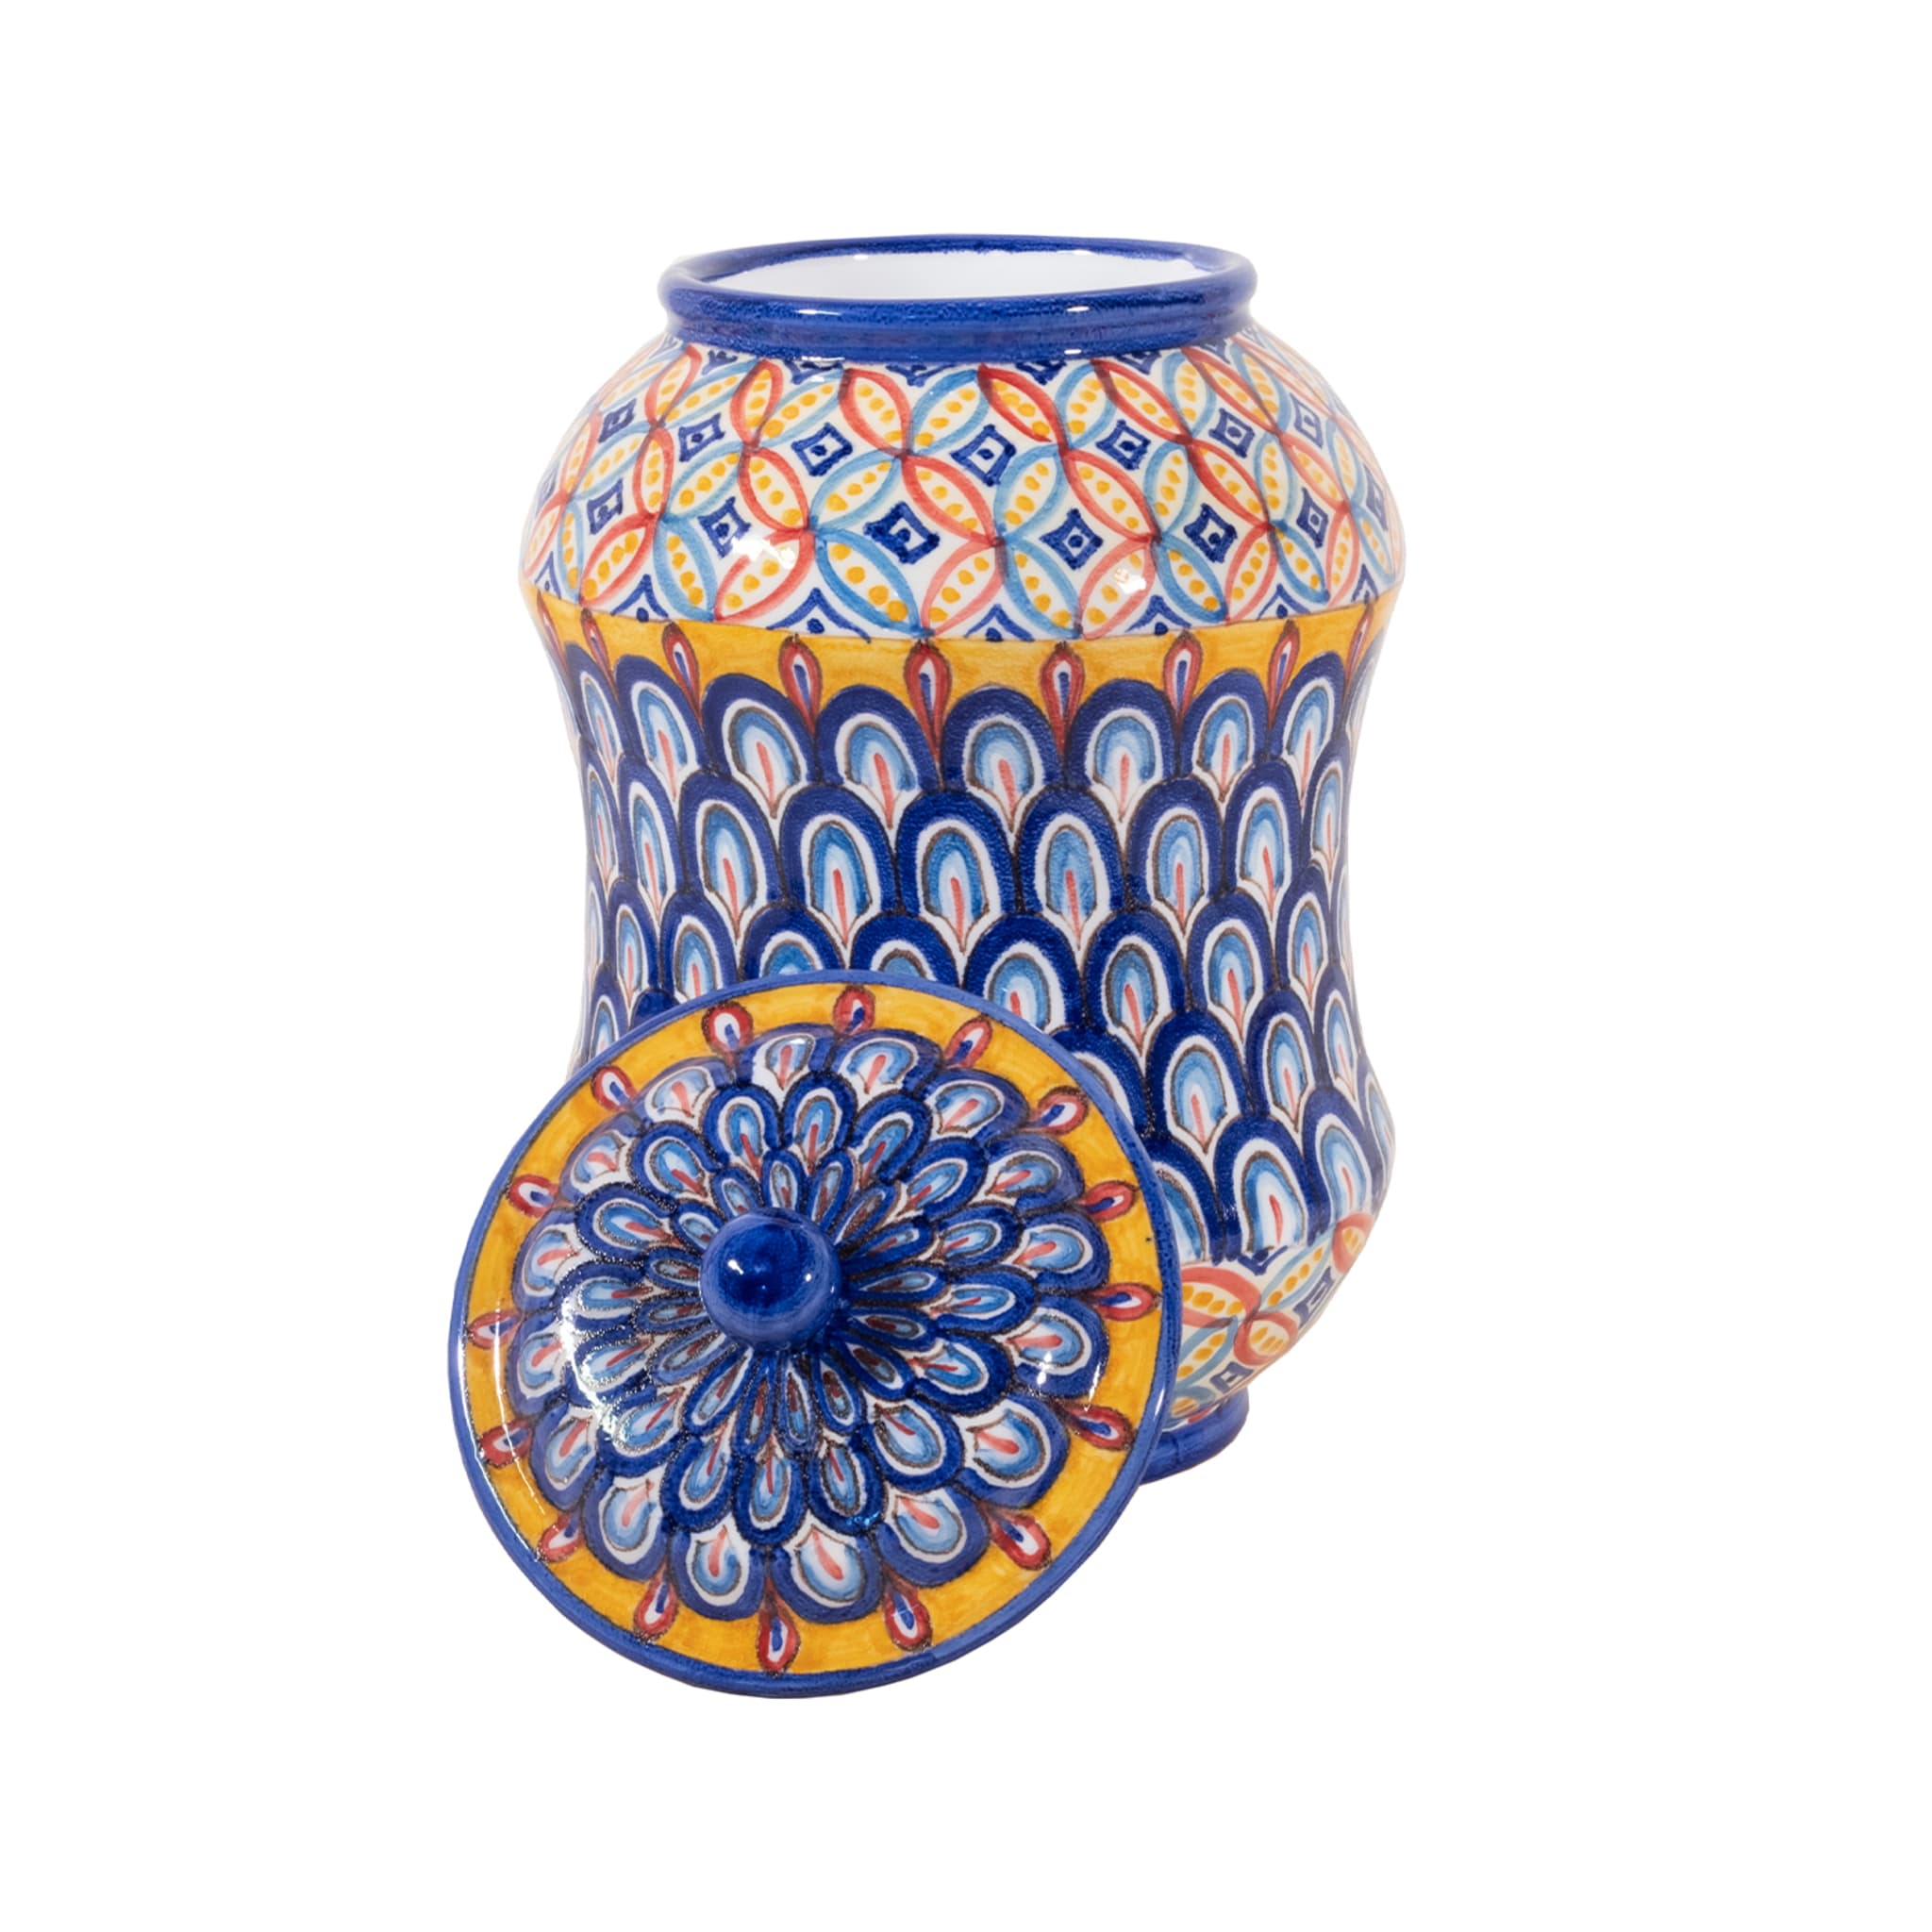 Pavone Flores Vase with Lid by Lorenza Adami - Alternative view 1